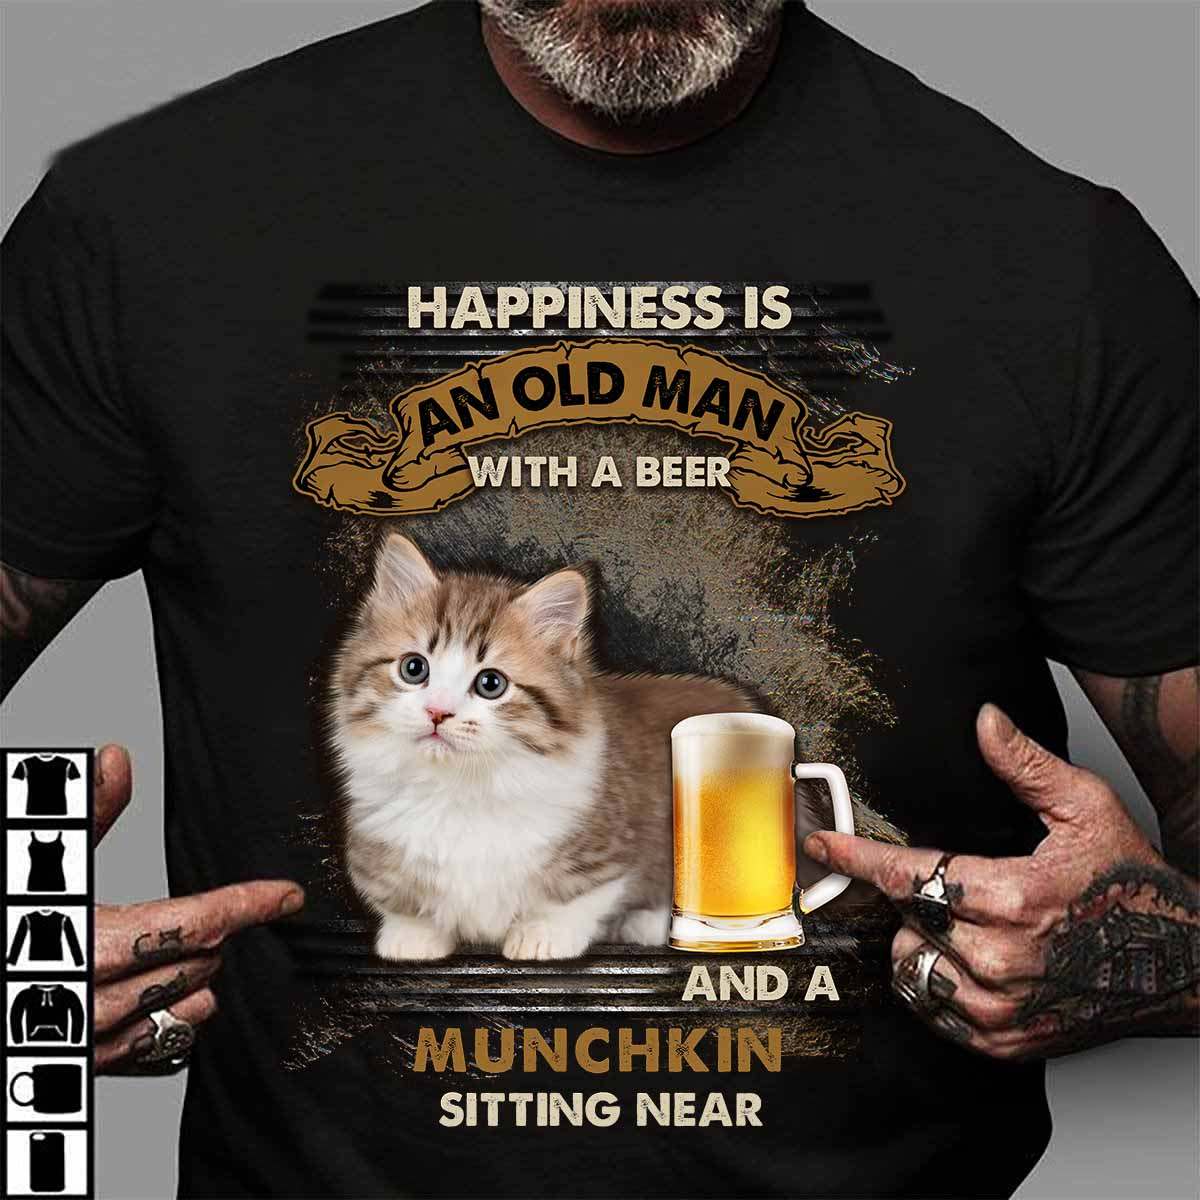 Happiness is an old man with a beer and a Munchkin sitting near - Cat and beer